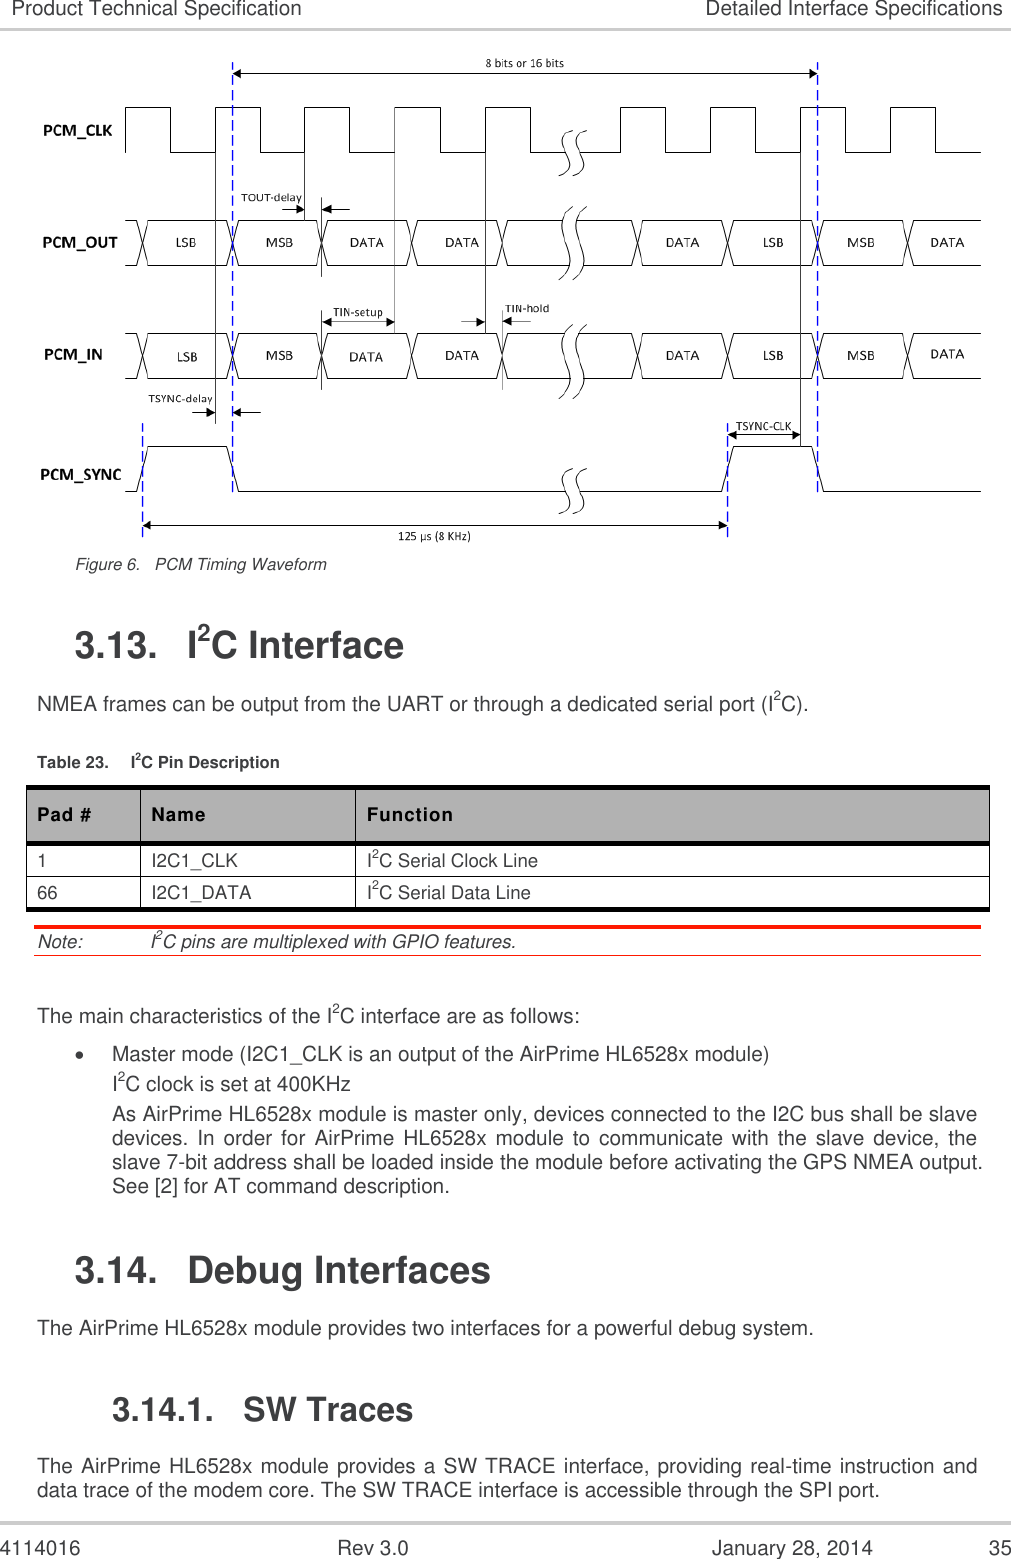  4114016  Rev 3.0  January 28, 2014  35 Product Technical Specification Detailed Interface Specifications  Figure 6.  PCM Timing Waveform 3.13.  I2C Interface NMEA frames can be output from the UART or through a dedicated serial port (I2C). Table 23.  I2C Pin Description Pad # Name Function 1 I2C1_CLK I2C Serial Clock Line 66 I2C1_DATA I2C Serial Data Line Note:   I2C pins are multiplexed with GPIO features.  The main characteristics of the I2C interface are as follows:  Master mode (I2C1_CLK is an output of the AirPrime HL6528x module) I2C clock is set at 400KHz As AirPrime HL6528x module is master only, devices connected to the I2C bus shall be slave devices. In order  for  AirPrime HL6528x module to communicate with  the slave device,  the slave 7-bit address shall be loaded inside the module before activating the GPS NMEA output. See [2] for AT command description. 3.14.  Debug Interfaces  The AirPrime HL6528x module provides two interfaces for a powerful debug system. 3.14.1.  SW Traces The AirPrime HL6528x module provides a SW TRACE interface, providing real-time instruction and data trace of the modem core. The SW TRACE interface is accessible through the SPI port. 